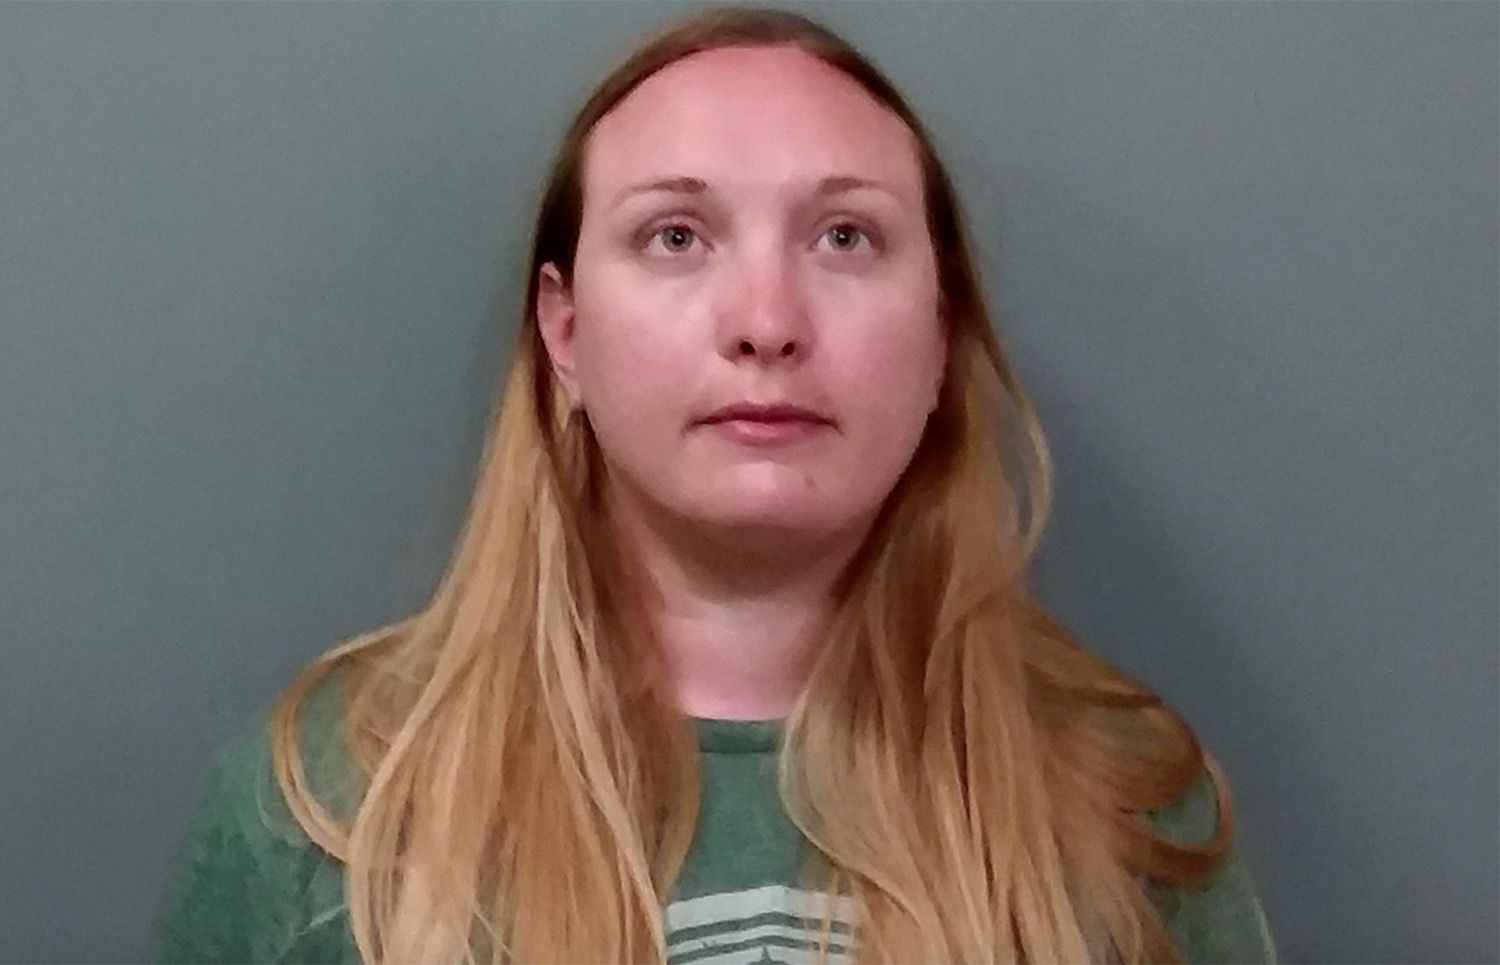 Beulah teacher accused of sending nude pictures to student